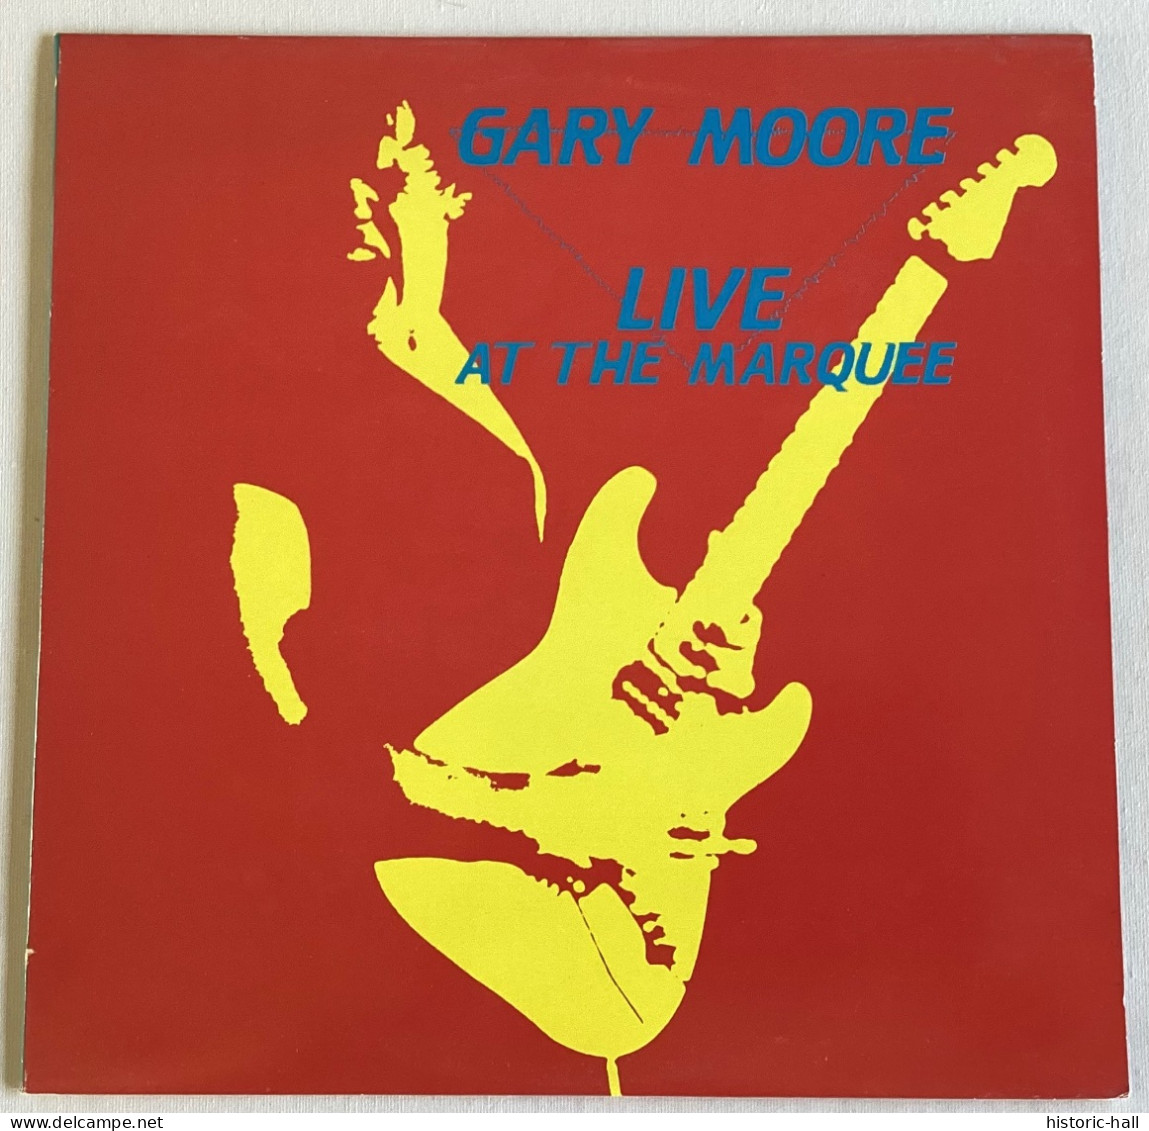 GARY MOORE - Live At The Marquee - LP - 1987 - Italian Press - Hard Rock & Metal